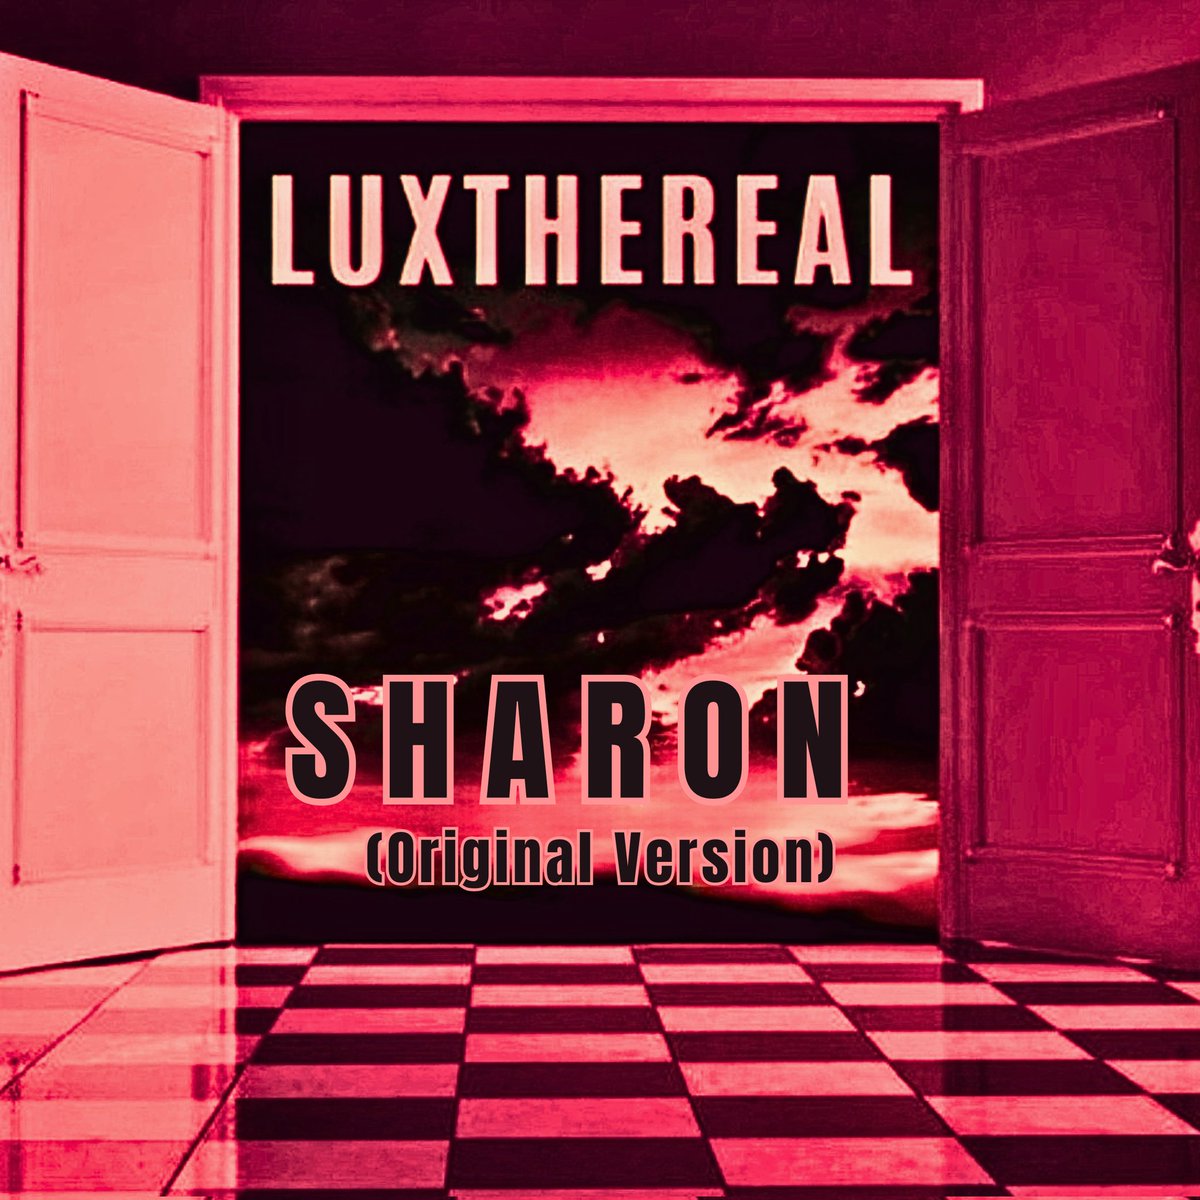 I'm listening to Luxthereal - Sharon on MM Radio - Tune in at mm-radio.com @luxthereal1